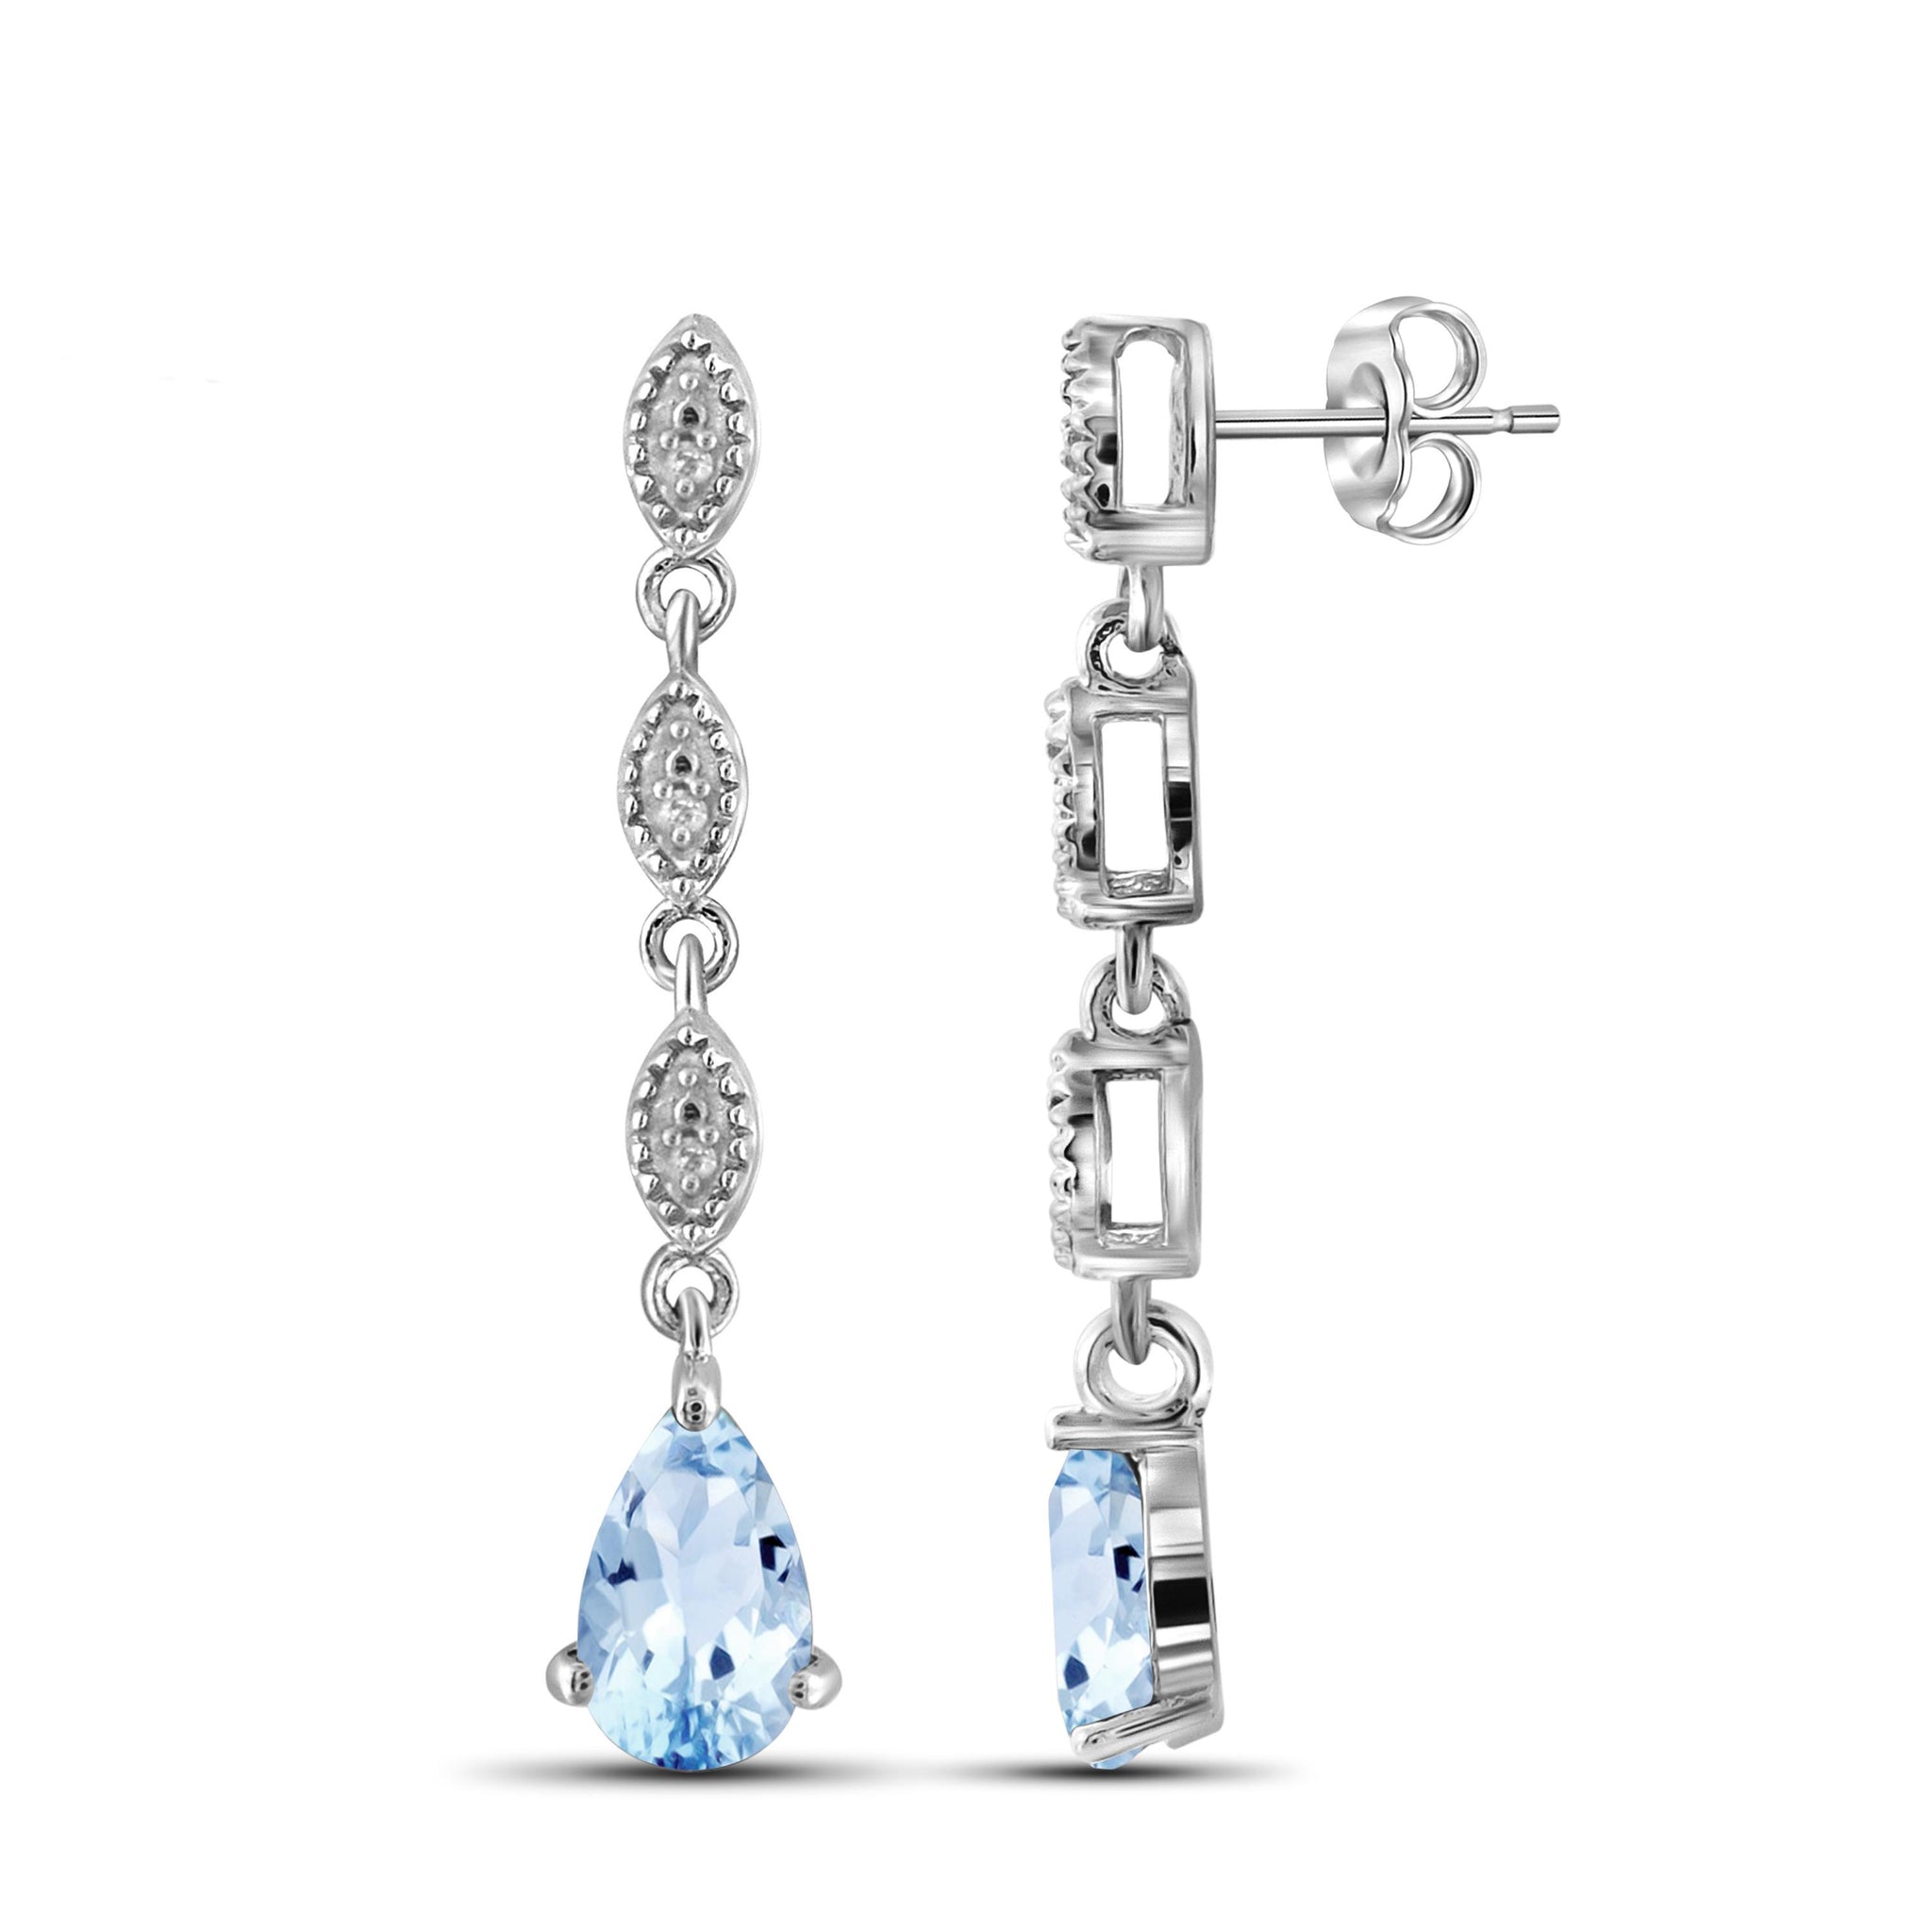 JewelonFire 2.00 Carat T.G.W. Sky Blue Topaz And White Diamond Accent Sterling Silver Earrings - Assorted Colors